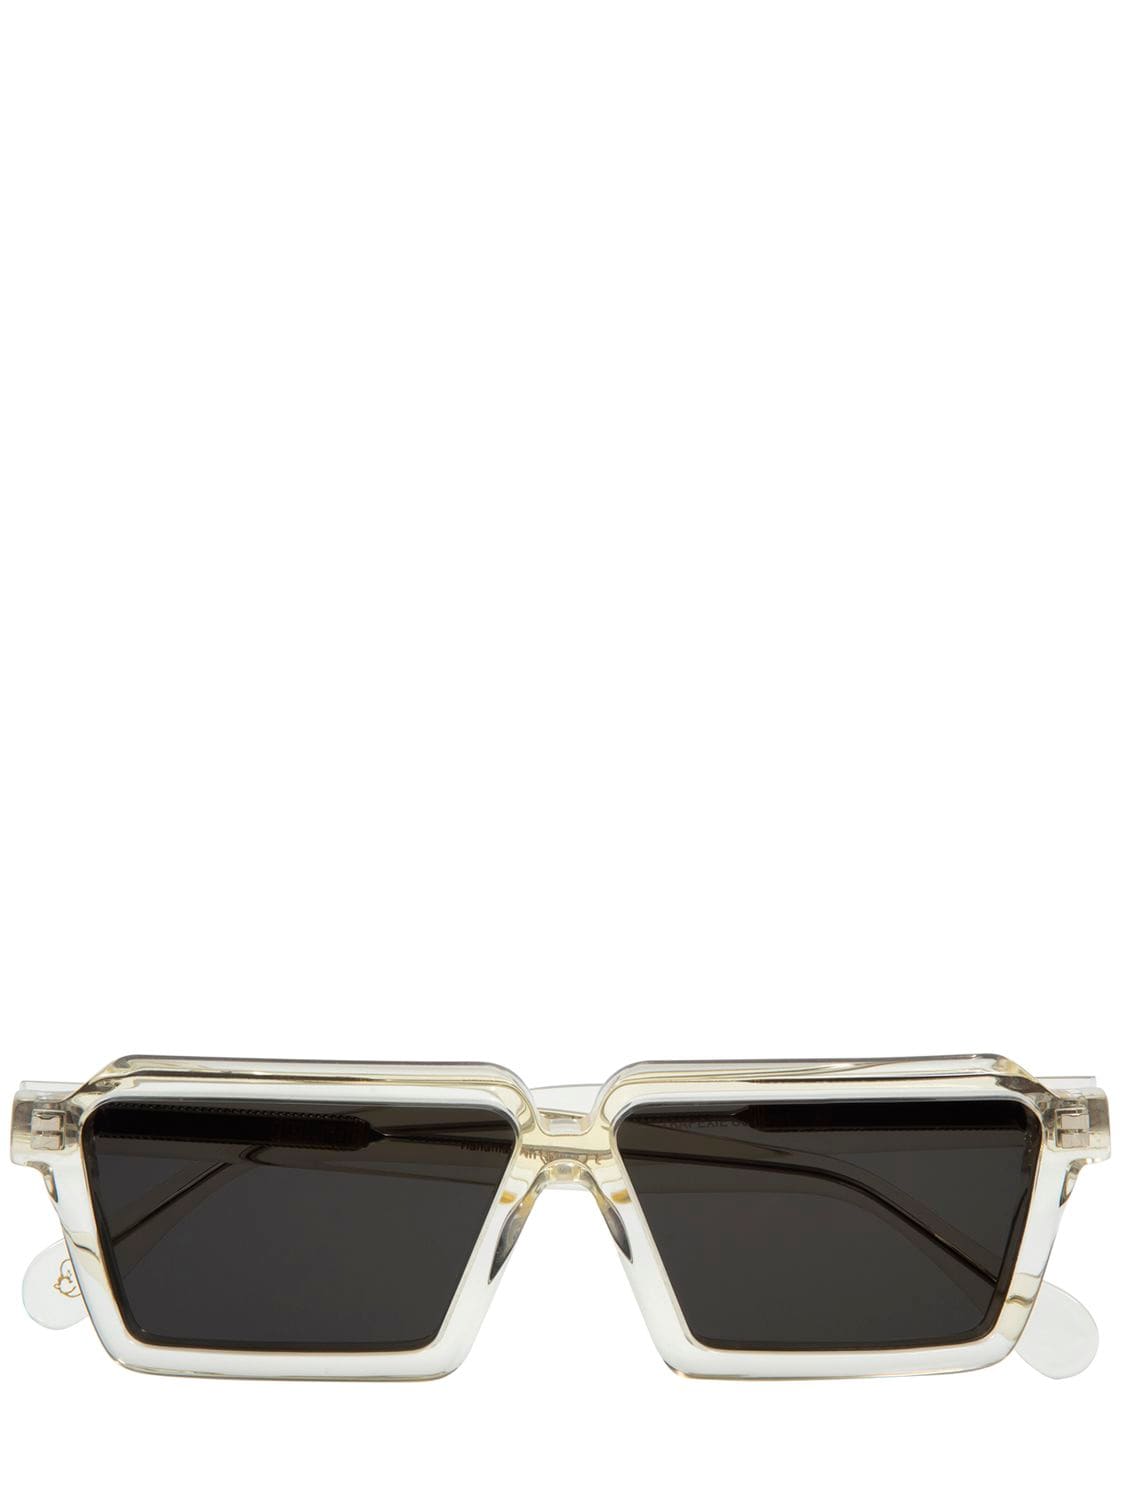 Delarge Trapexie Squared Acetate Sunglasses In Champagne,grey